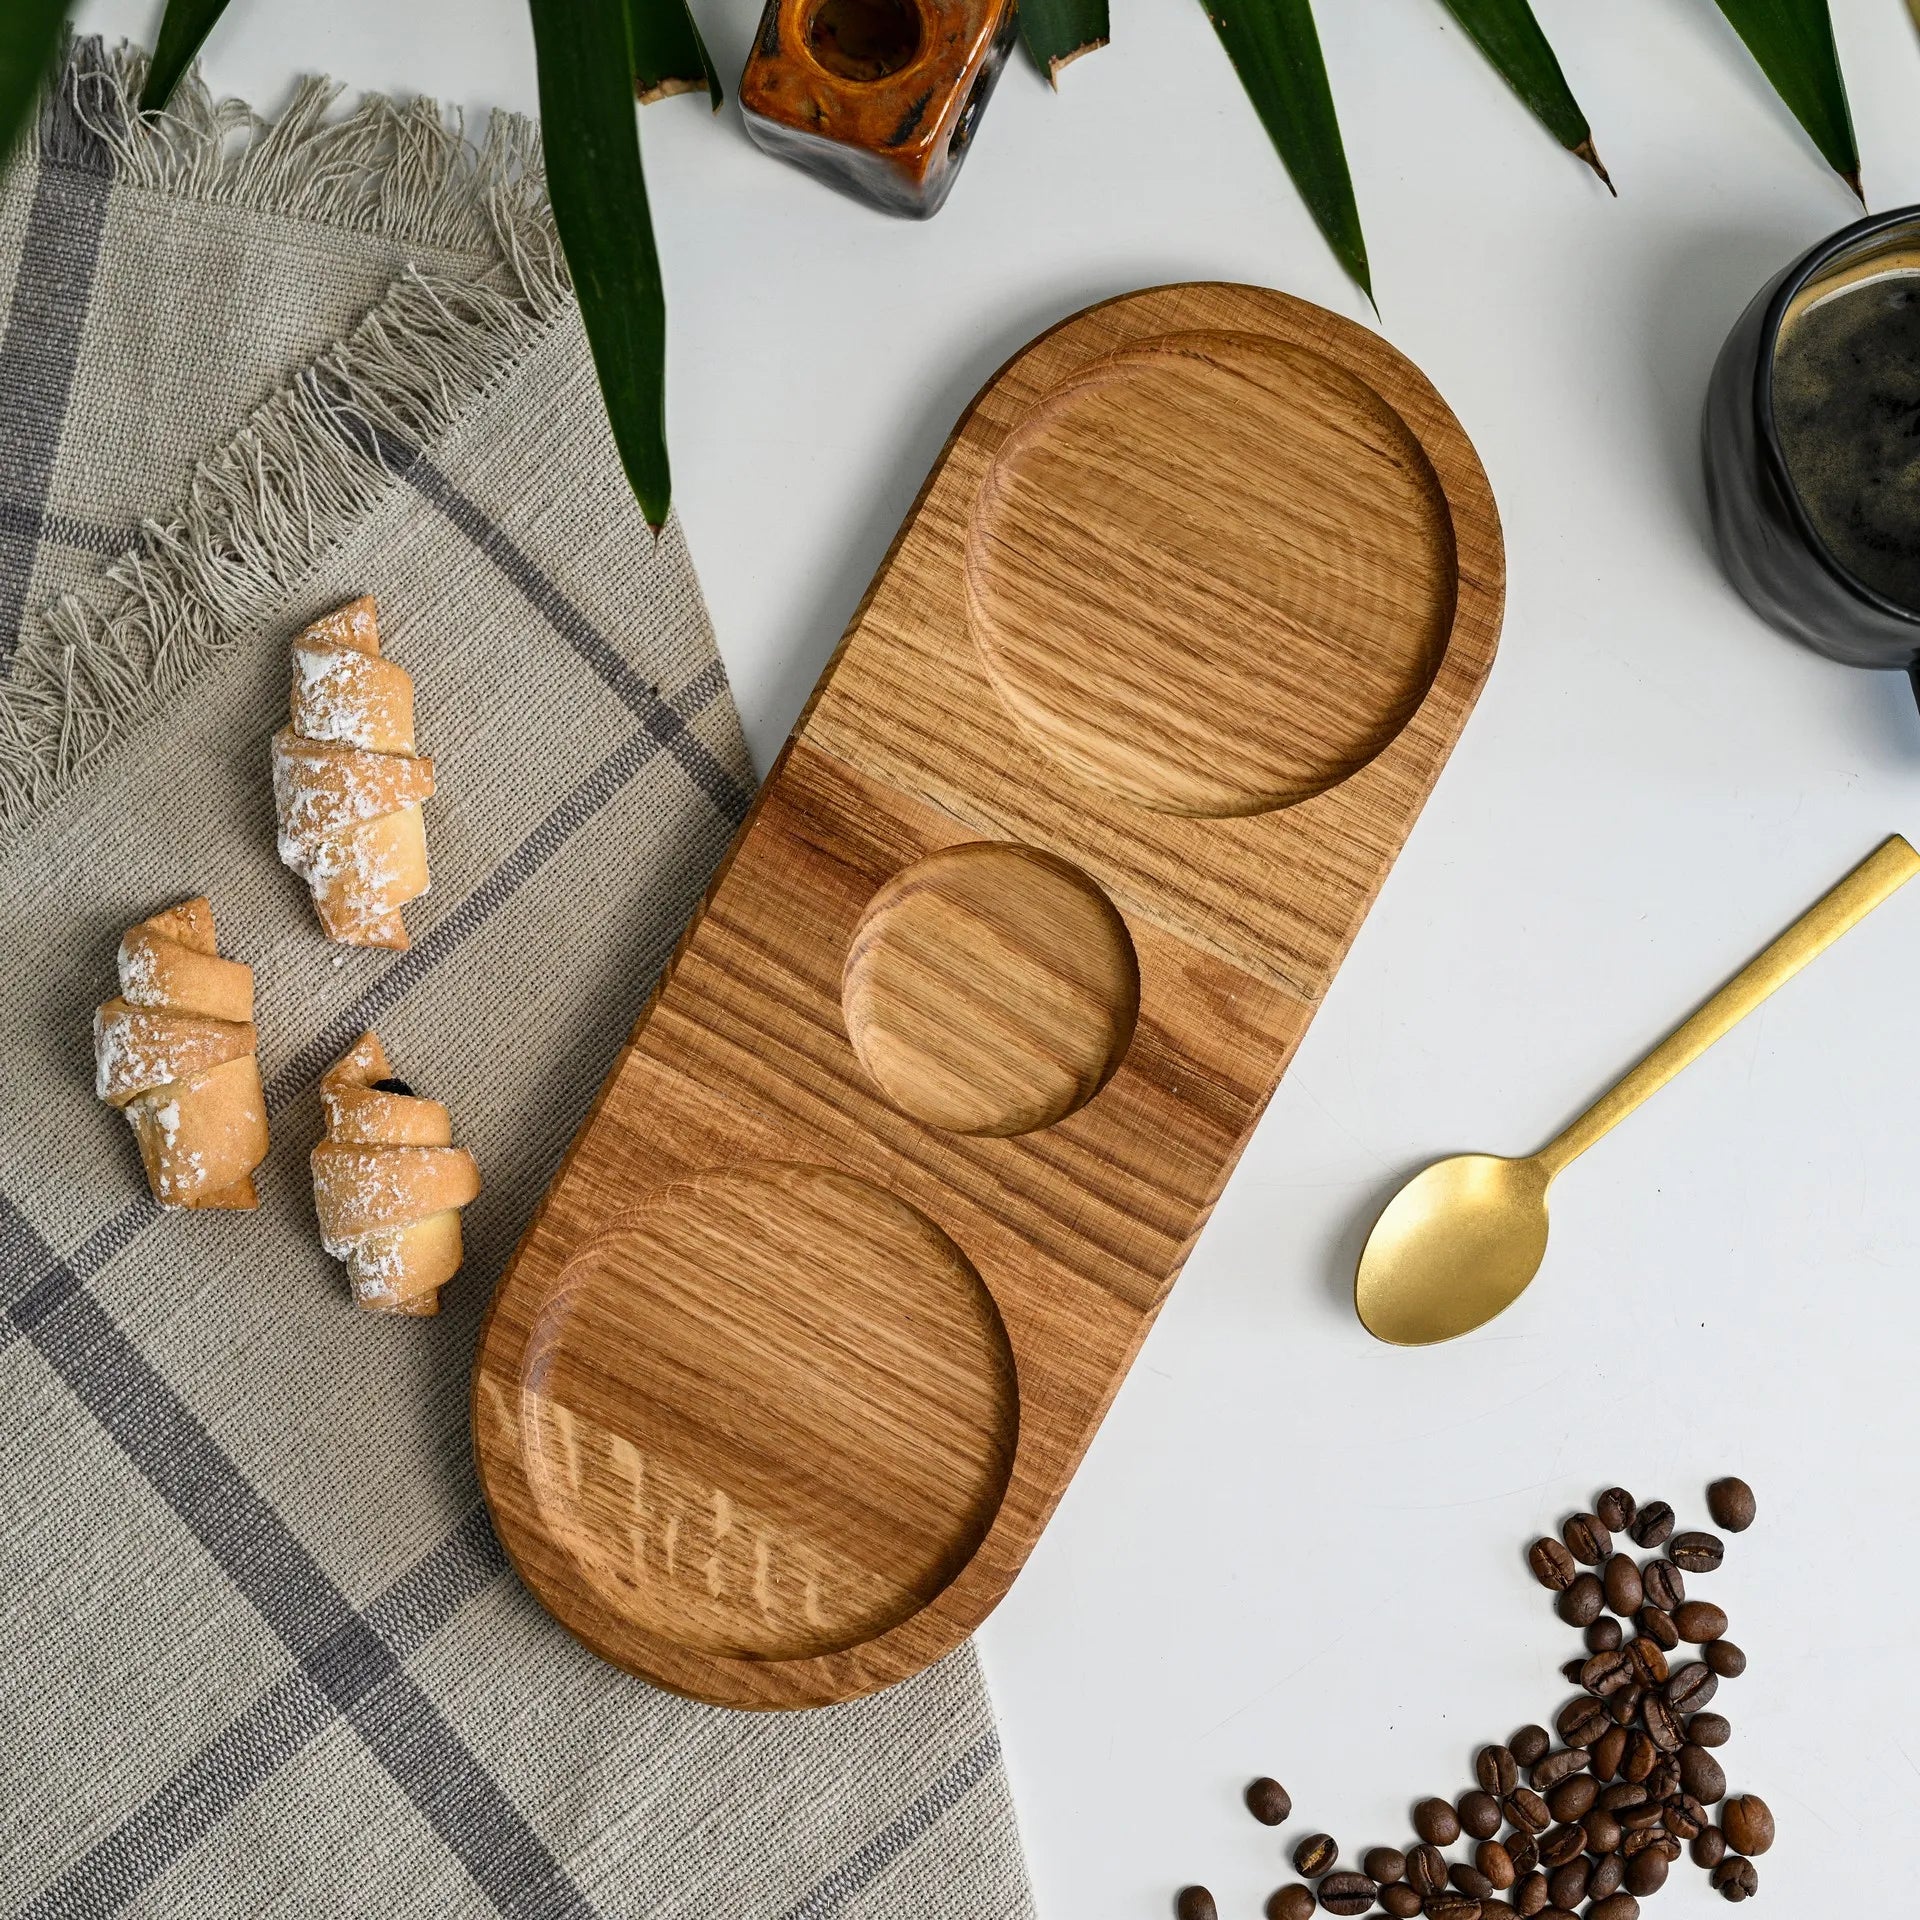 Rustic kitchen tray, ideal for food preparation and serving, made from high-quality wood for durability and style.